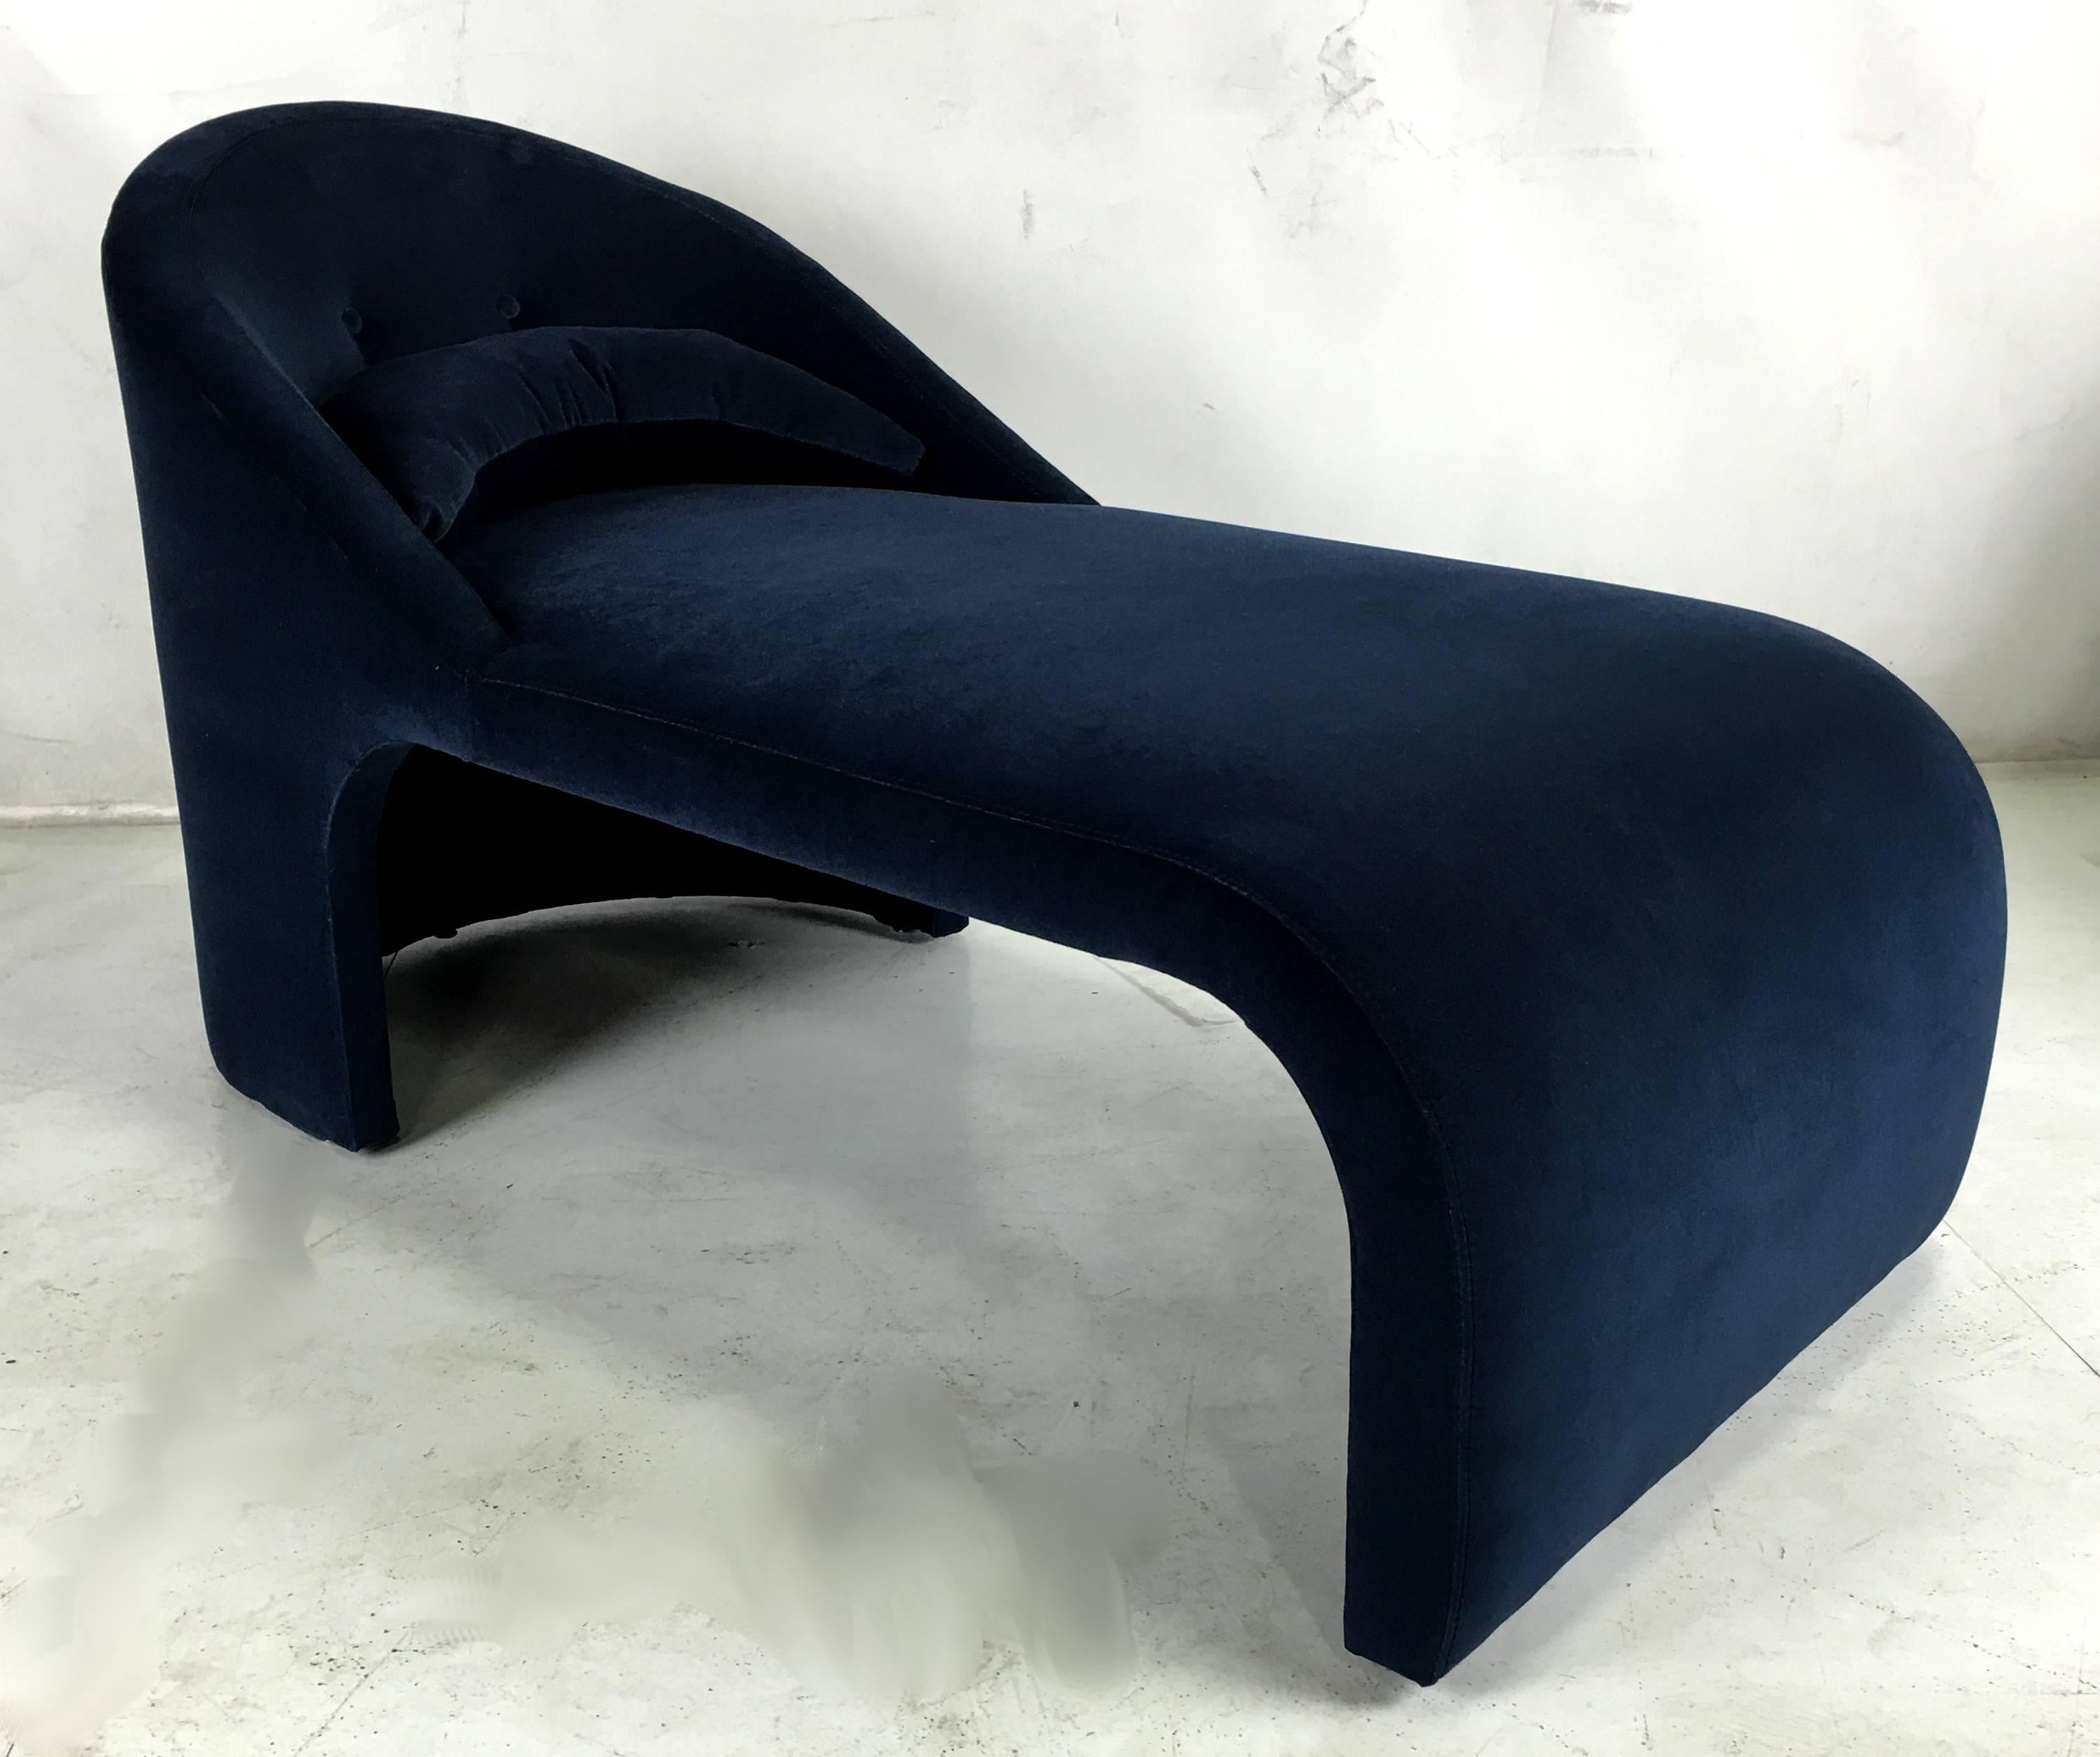 Mod waterfall front chaise attributed to Vladimir Kagan for Directional.